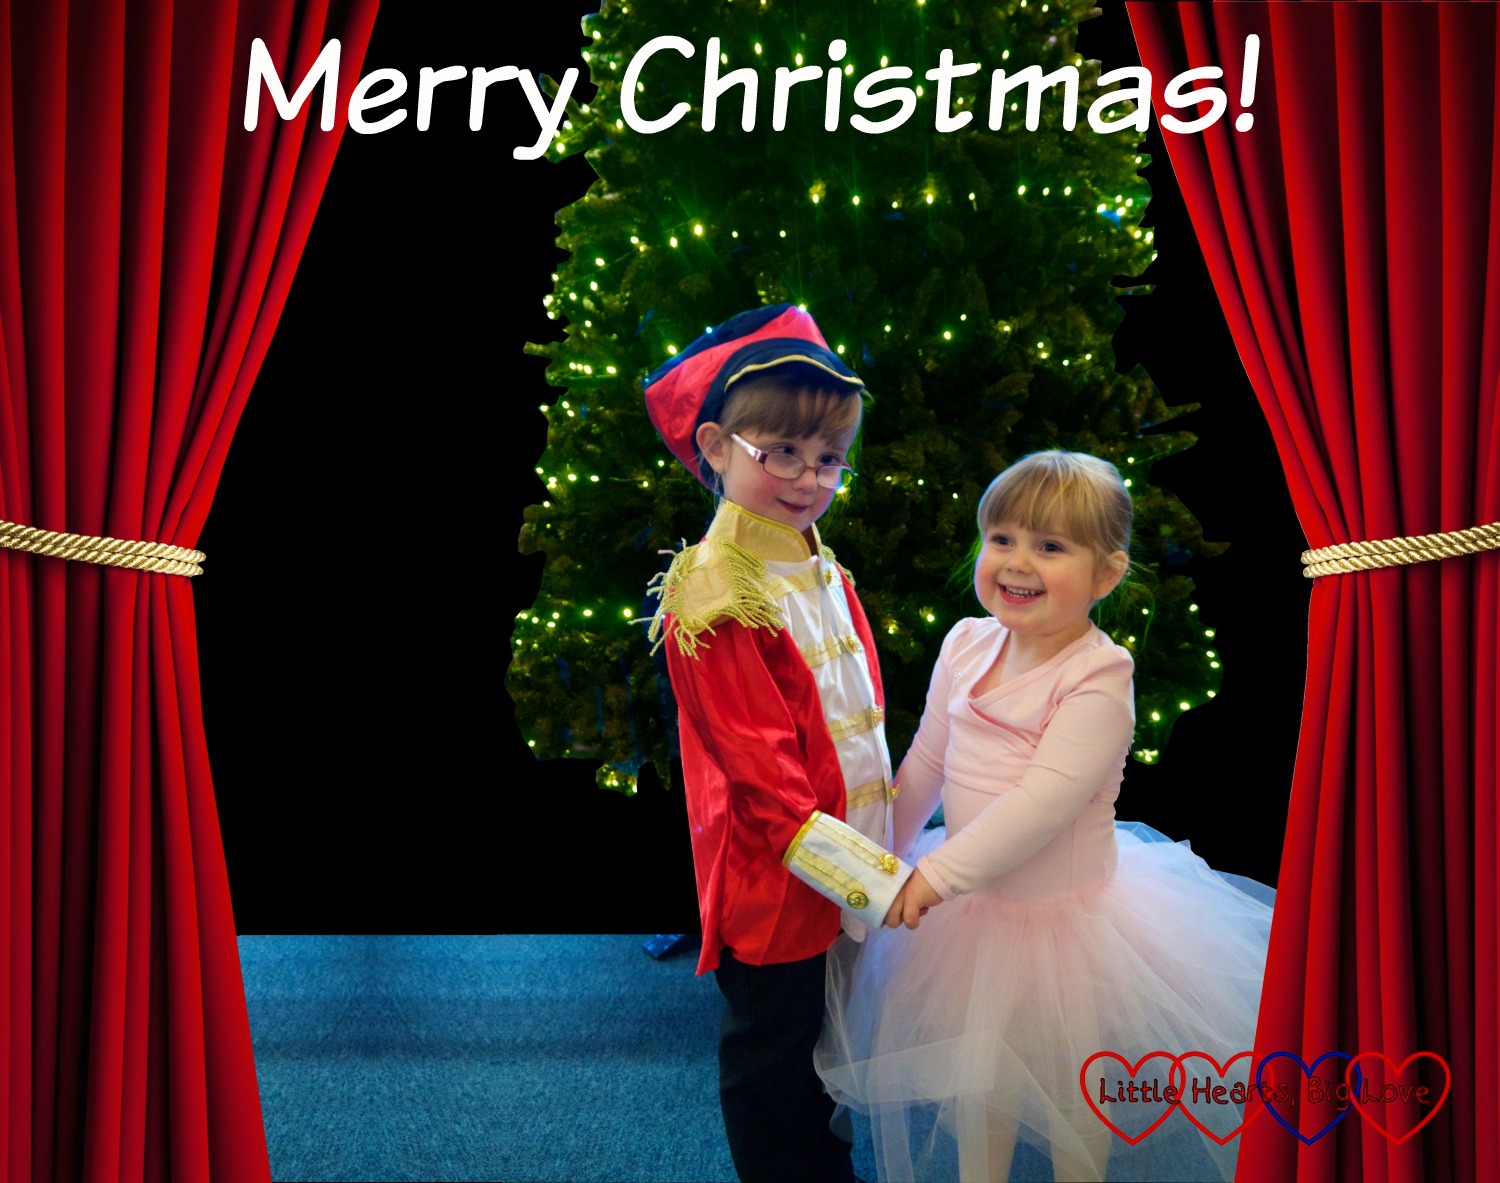 Jessica dressed in a soldier costume and Sophie in a pink tutu standing in front of a Christmas tree with stage curtains either side of them and the text "Merry Christmas"